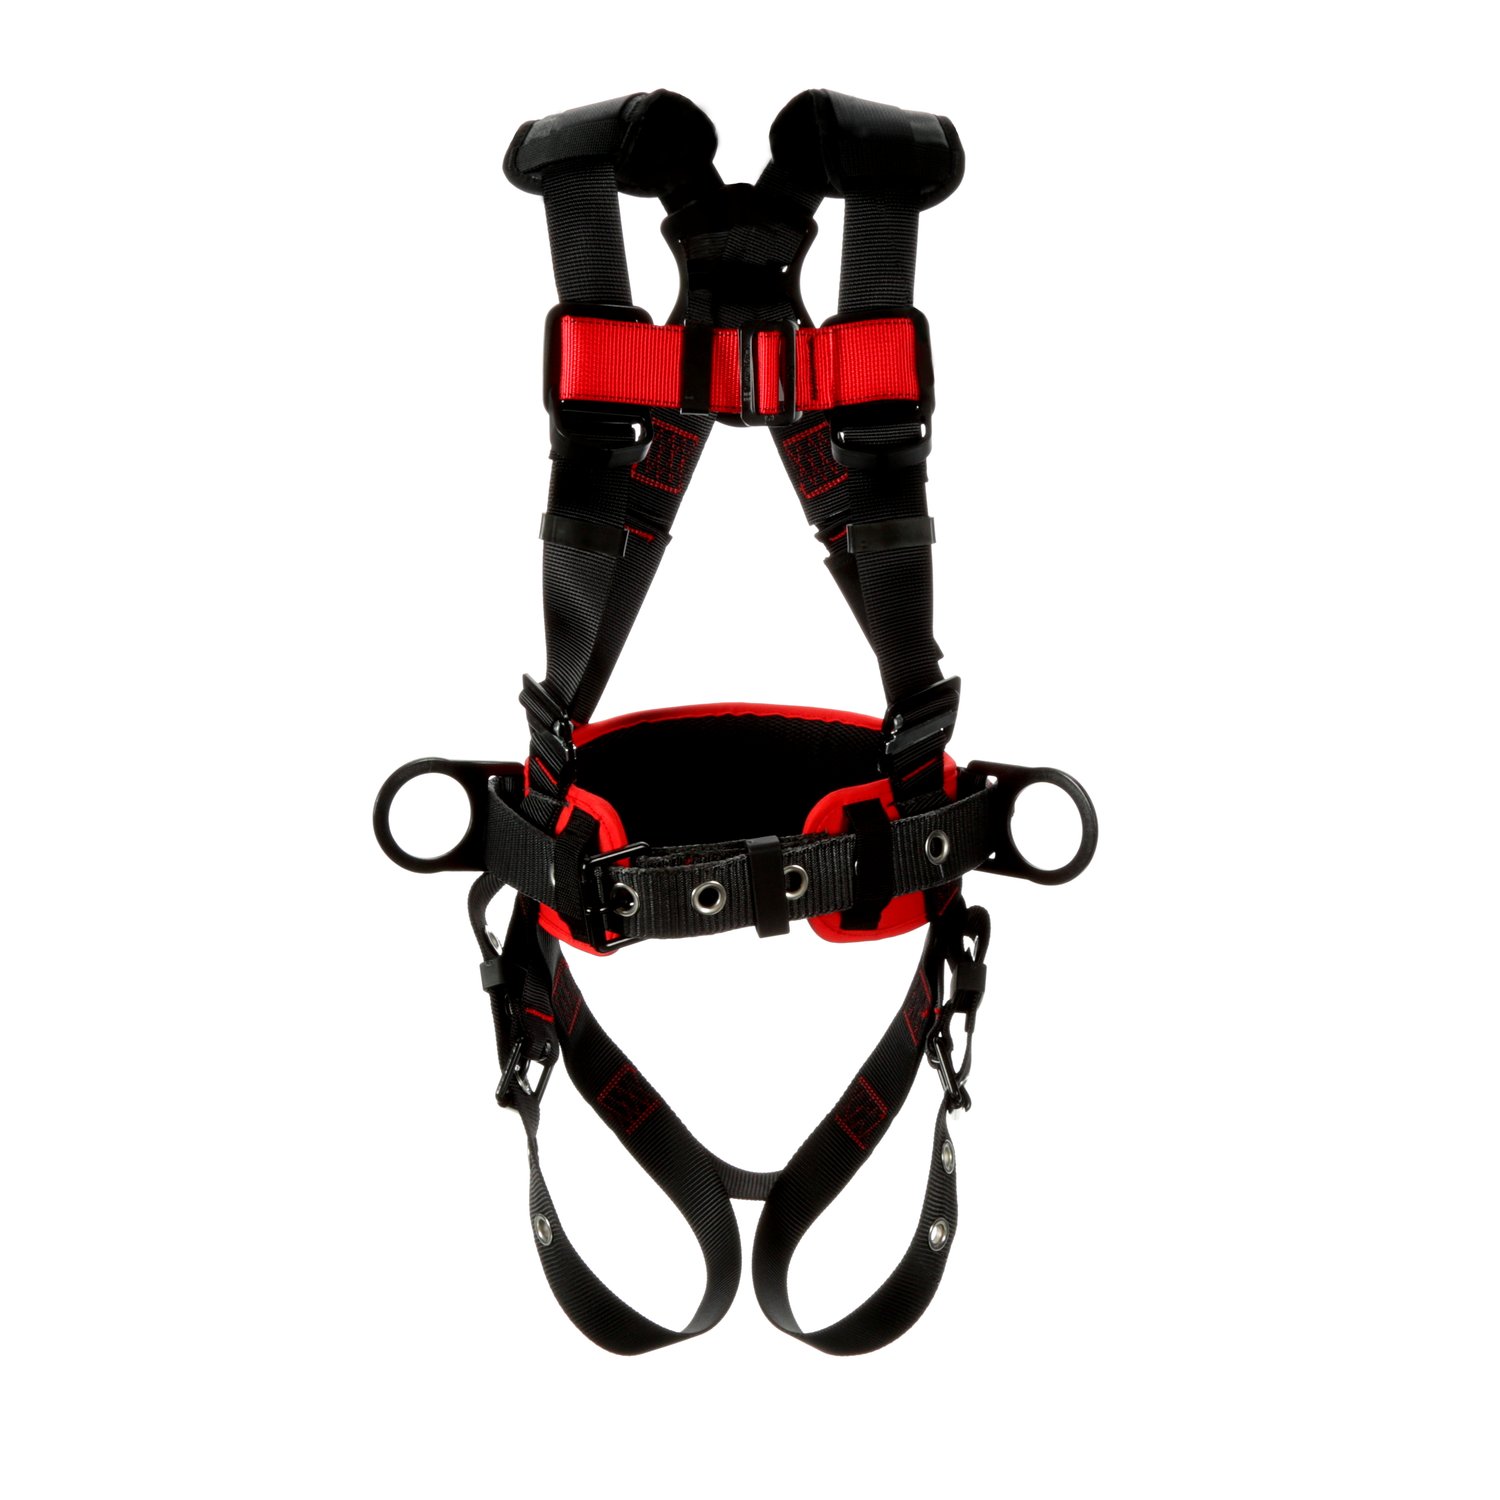 7100259433 - 3M Protecta P200 Construction Positioning Safety Harness 1161311, 2X